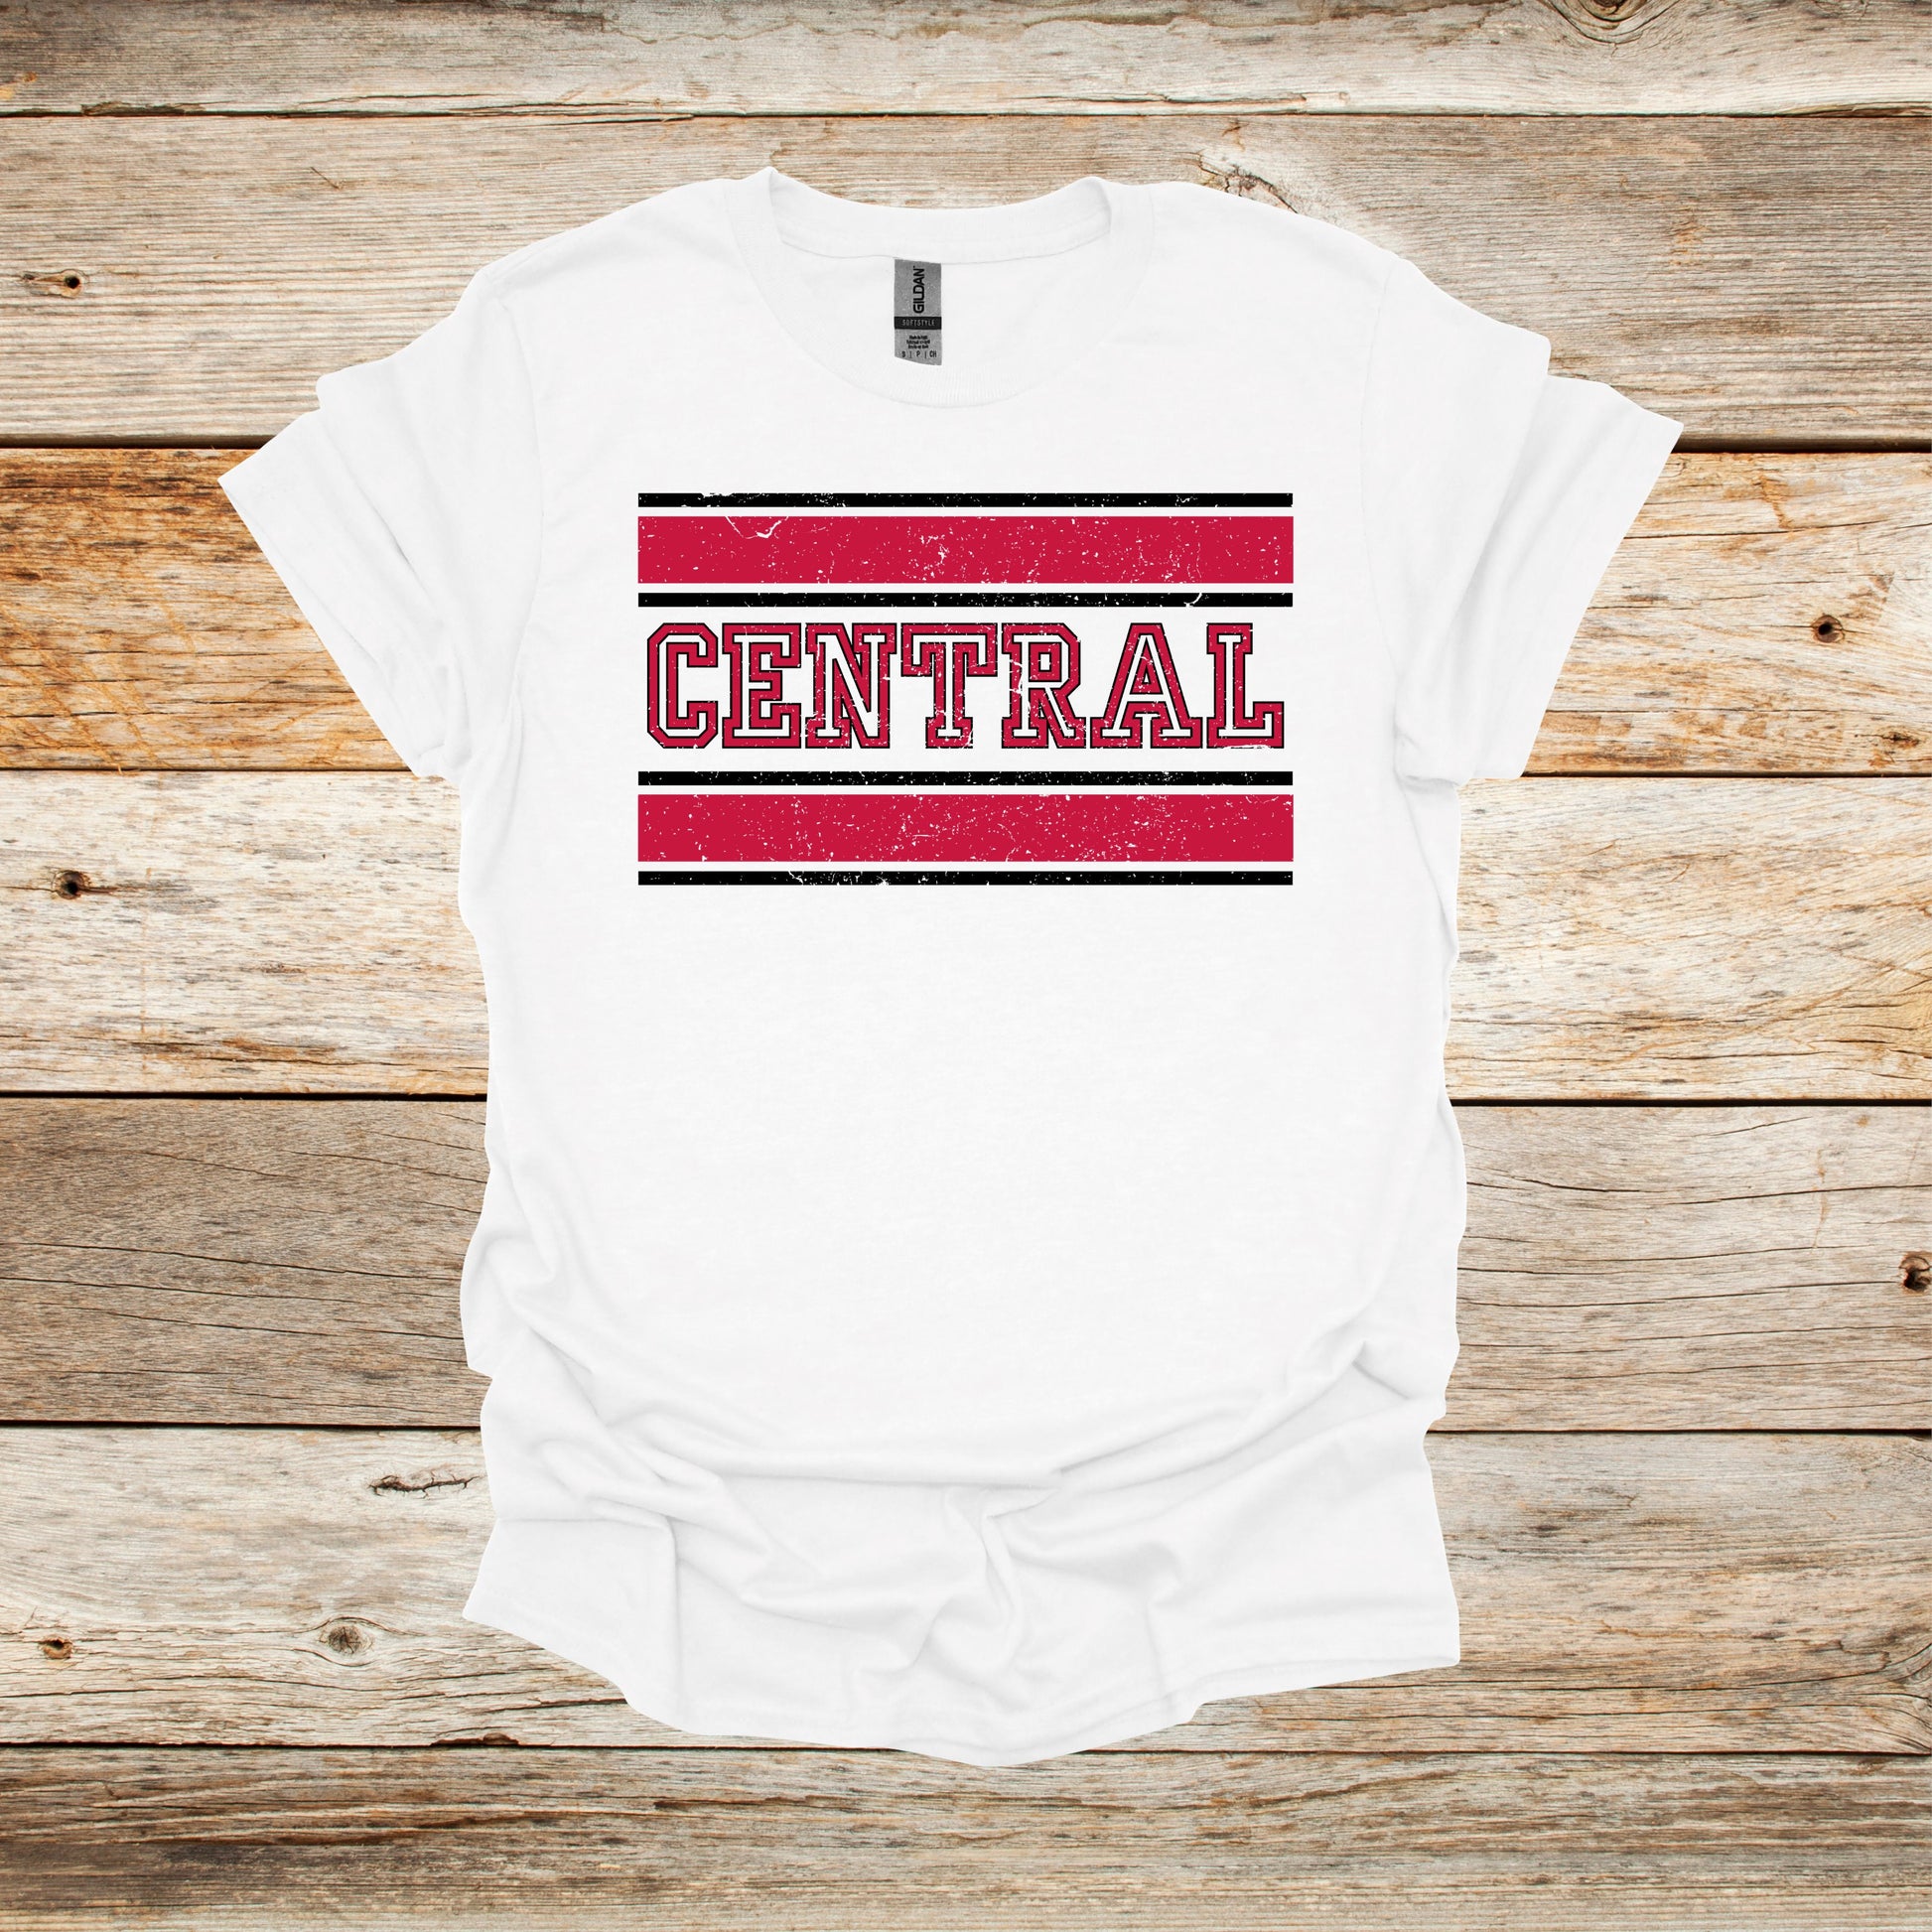 College T Shirt - University of Central Missouri Mules - Adult and Children's Tee Shirts T-Shirts Graphic Avenue White Adult Small 